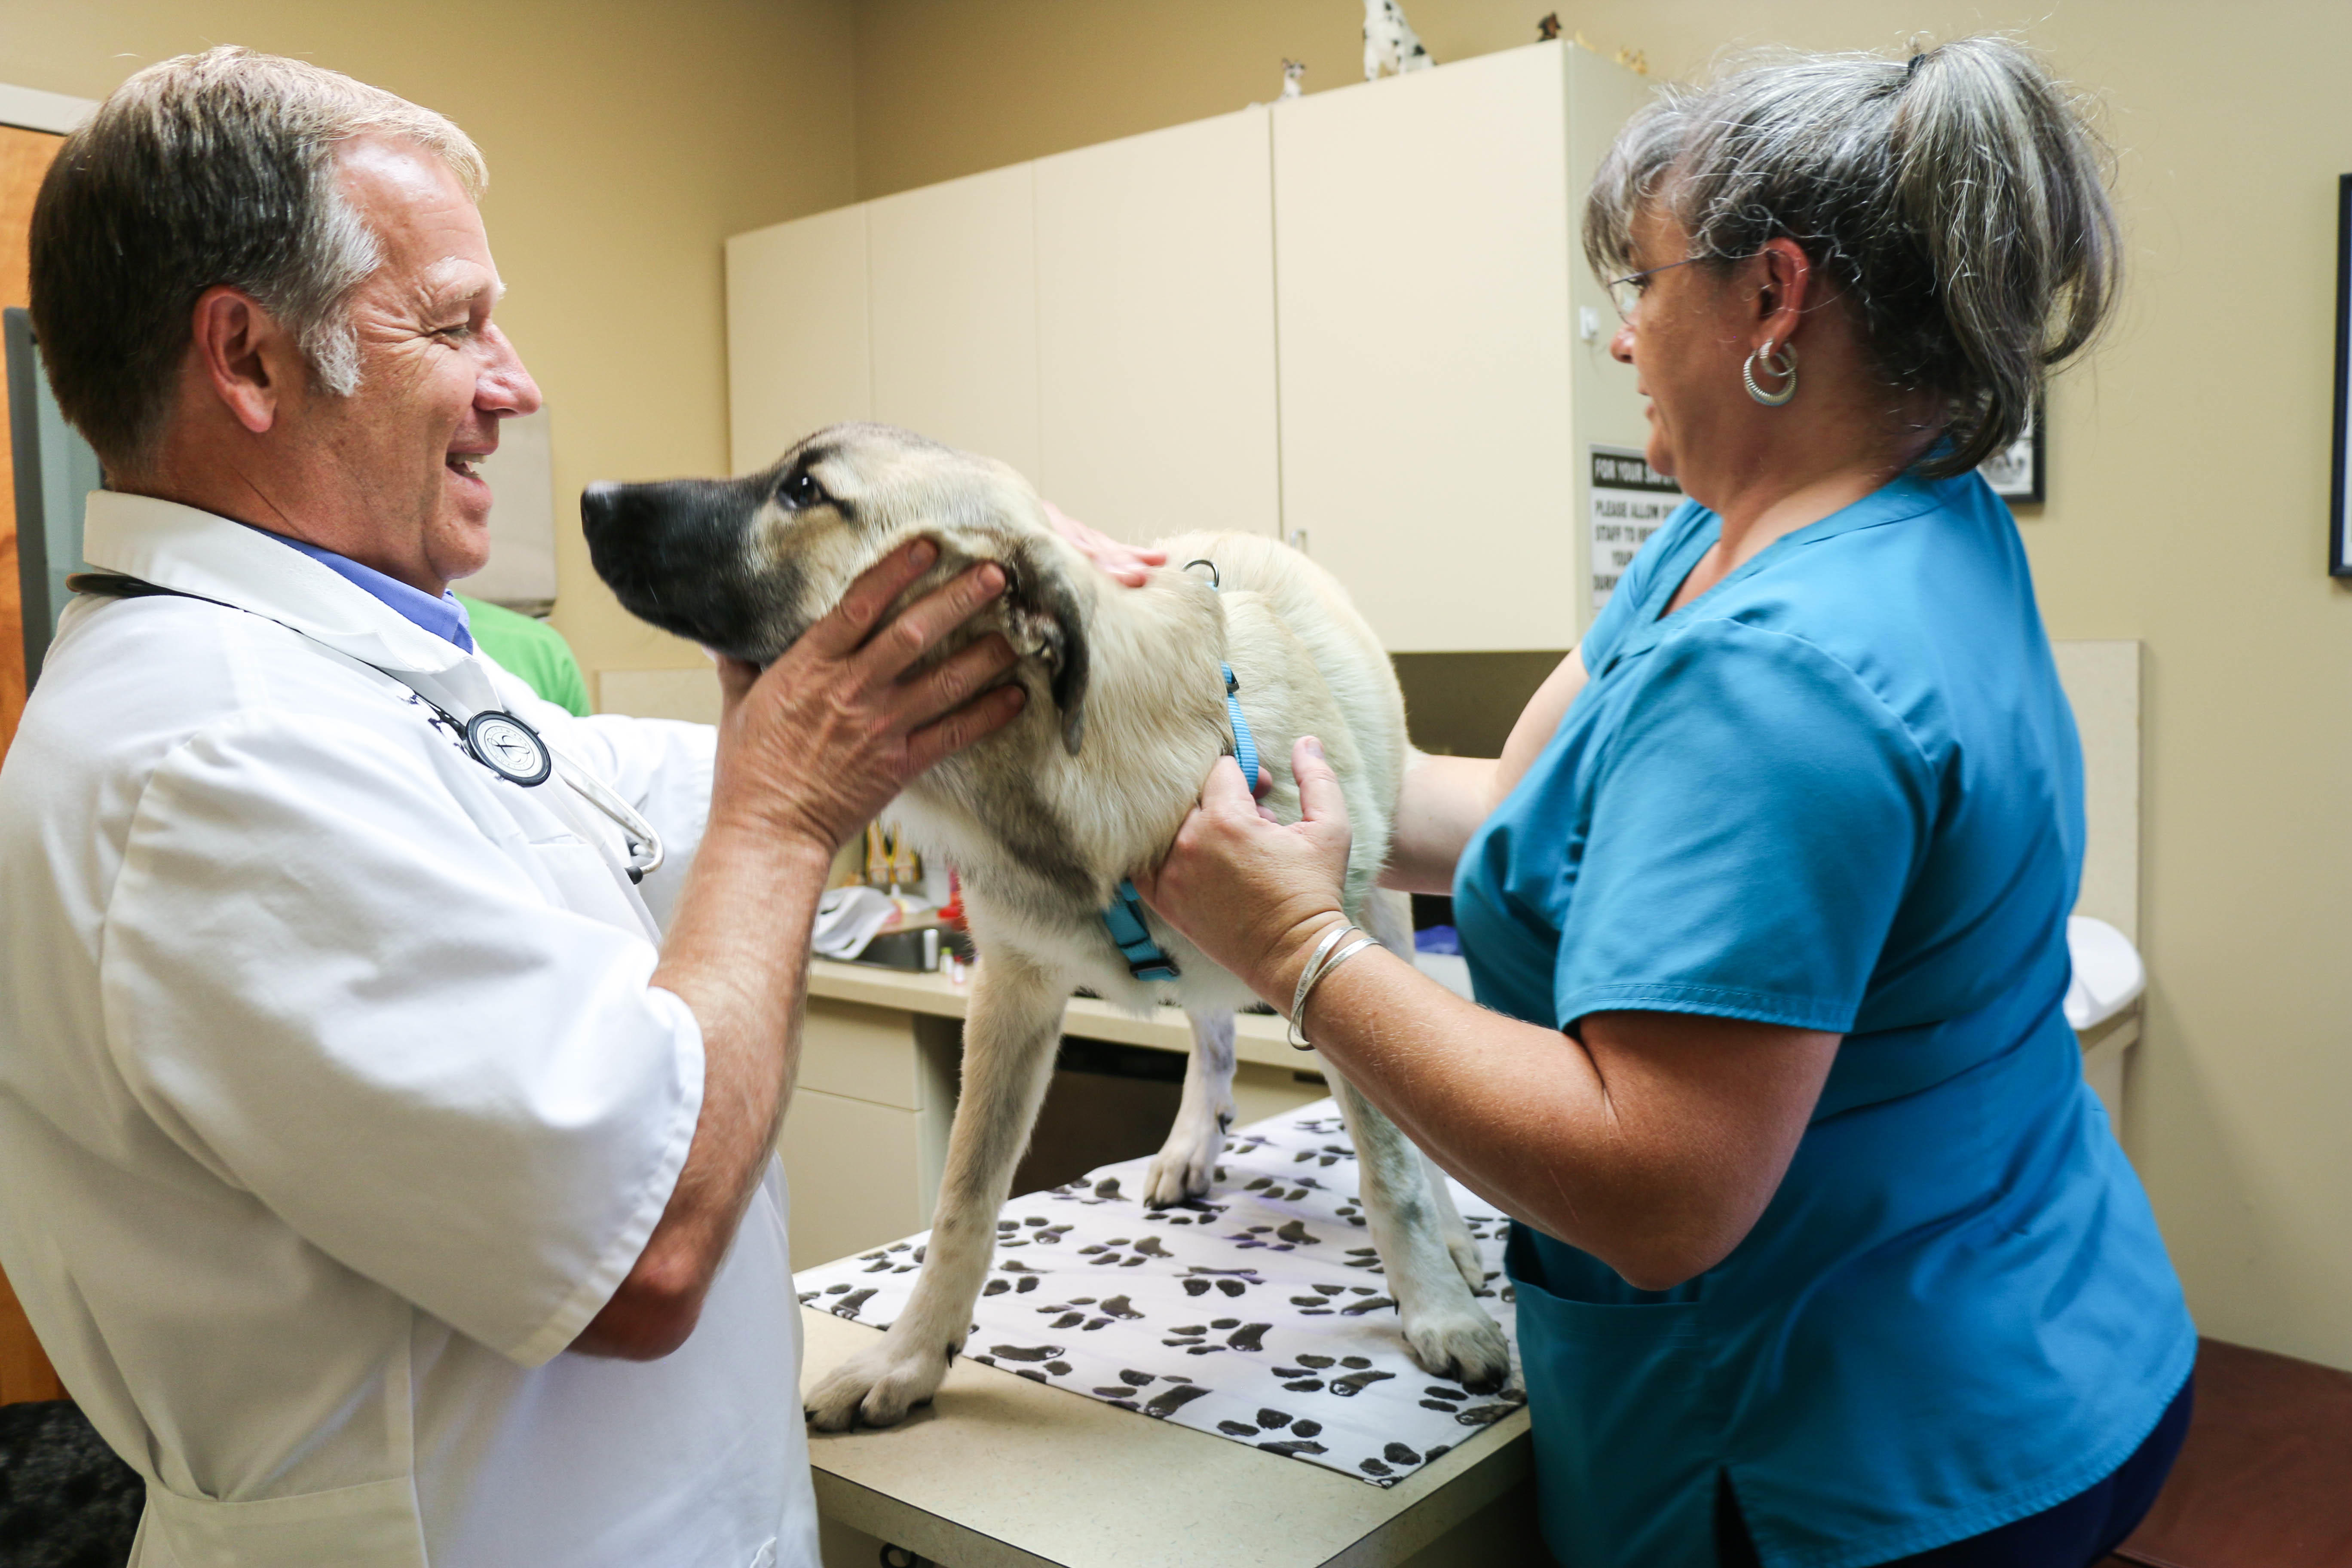 Dr. Willie Smith begins a physical exam on his adorable canine patient.